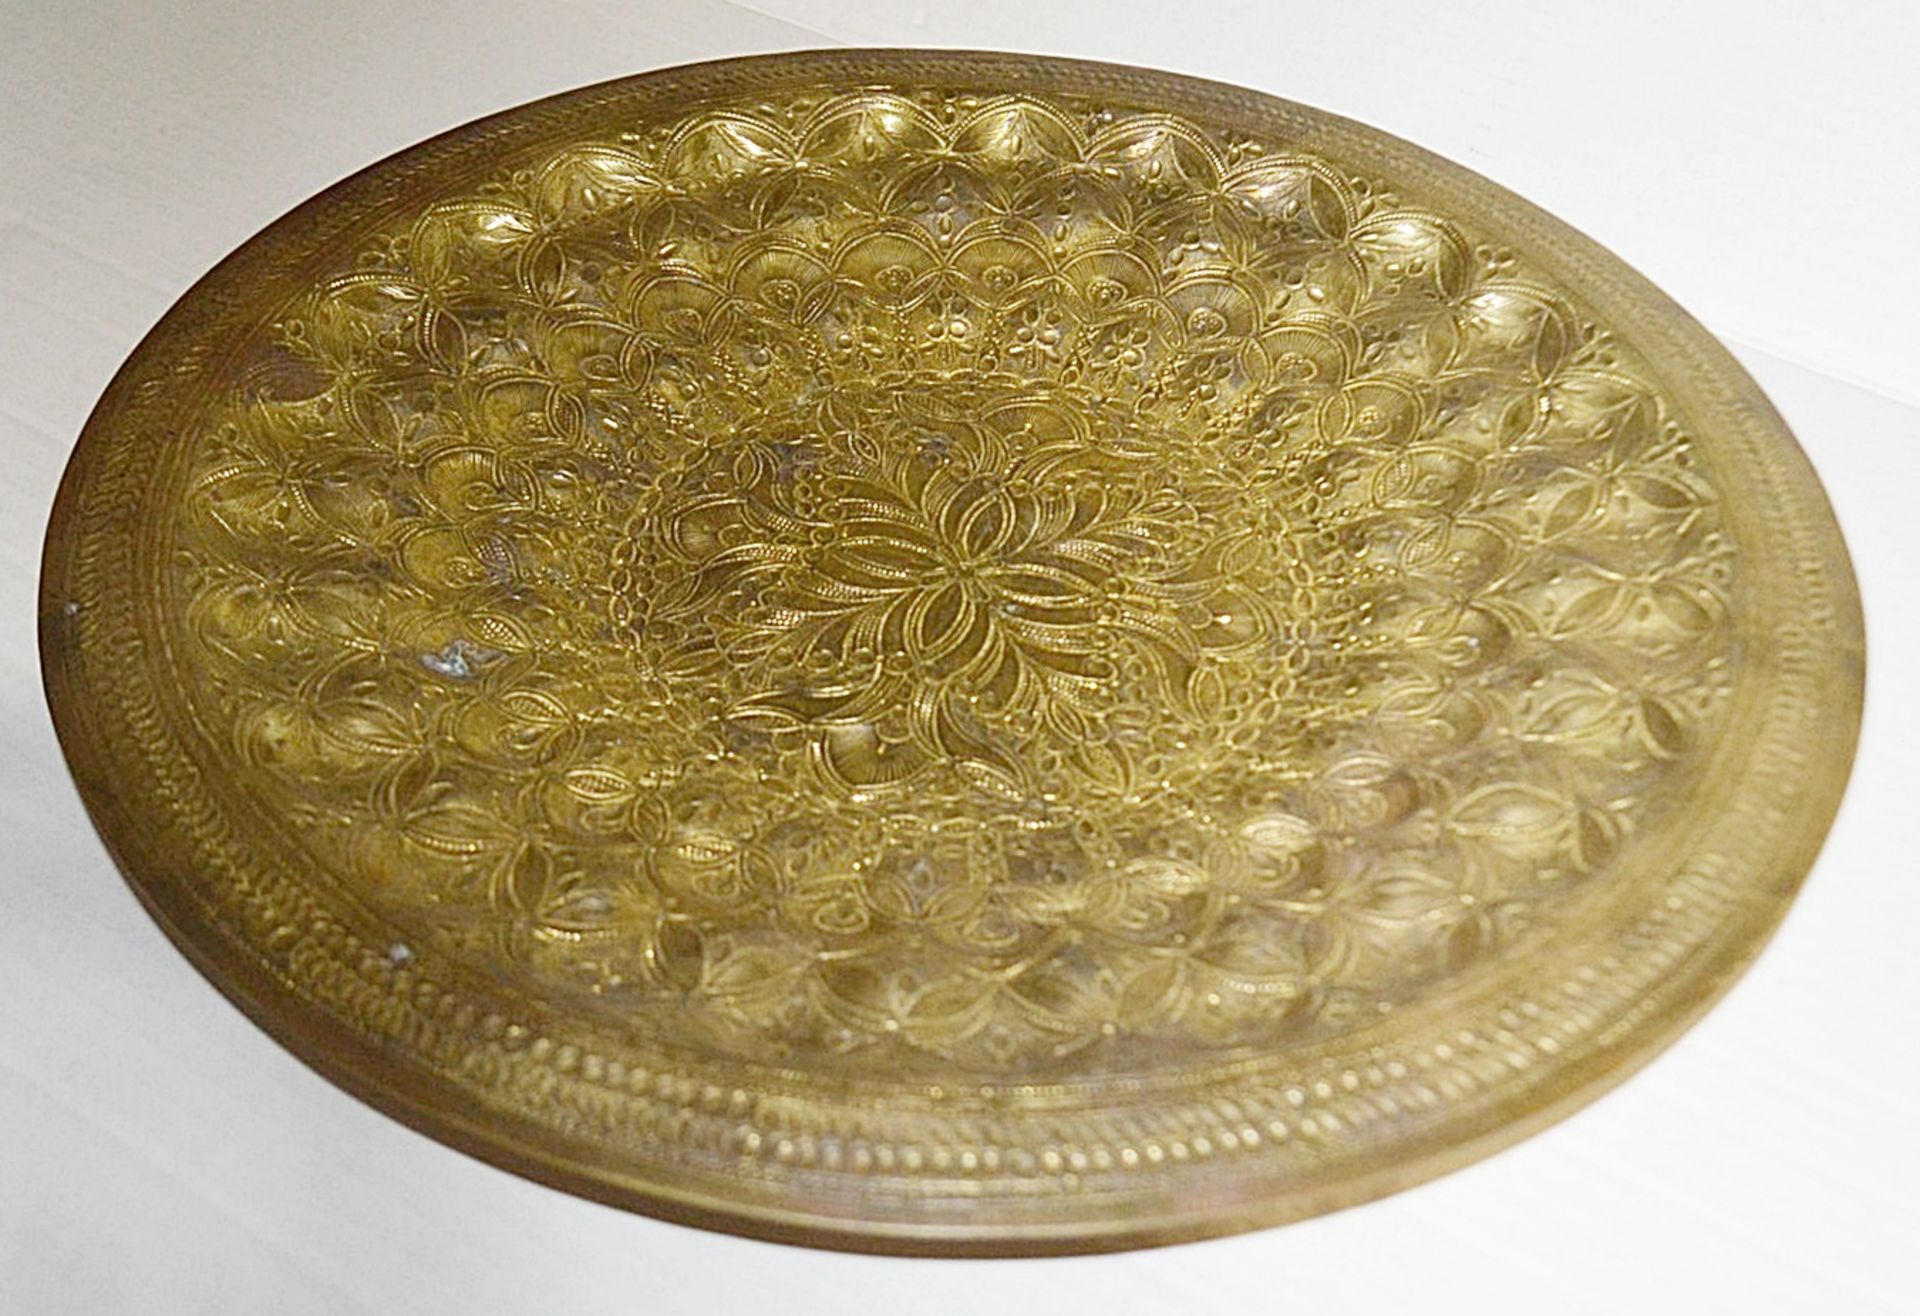 1 x Persian / Ottoman Gilt Metal Tombak Charger - 35cm (13.75ins) In Diameter - Preowned - NO VAT ON - Image 5 of 5